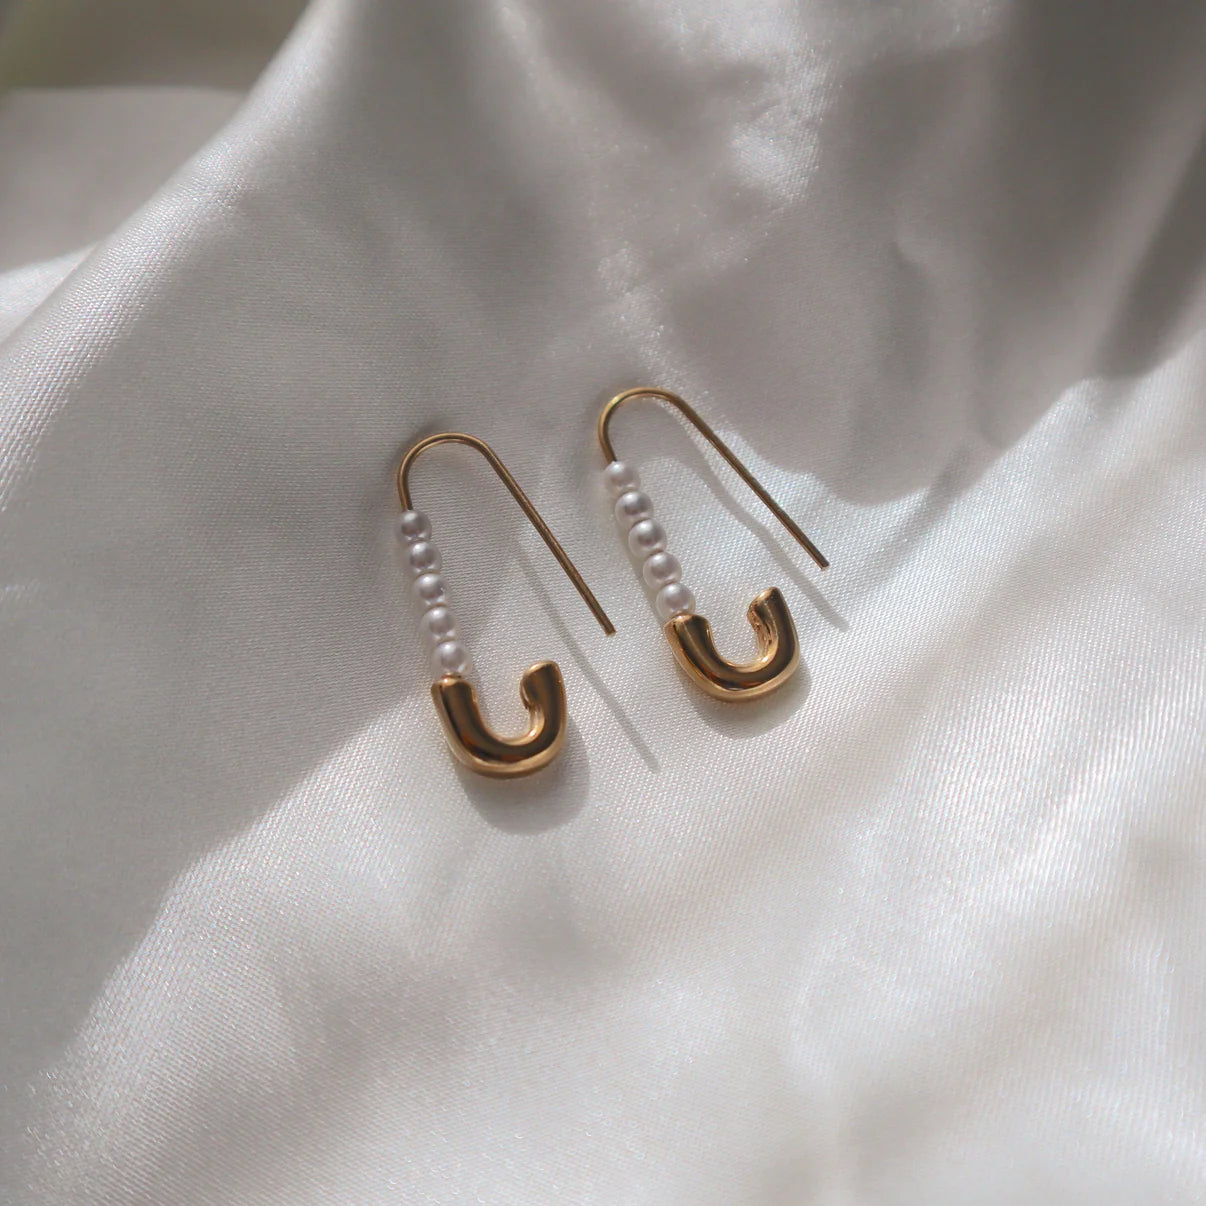 The Pearl Safety Pin Earrings